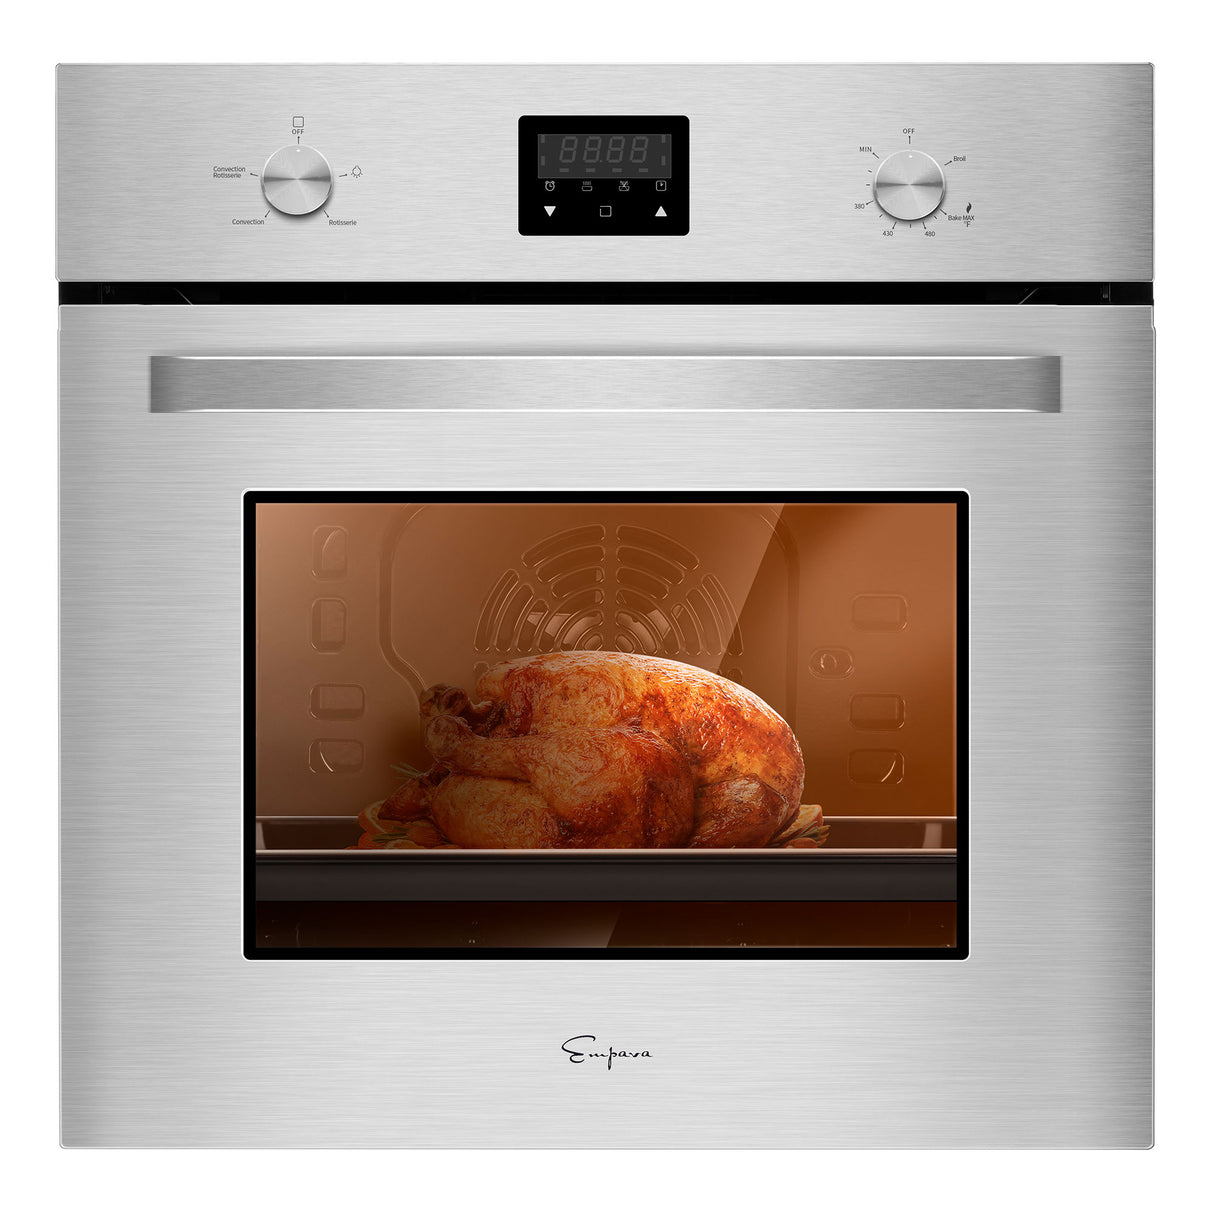 Empava 24" 2.3 cu. ft. Single Natural Gas Wall Oven - 24WO09